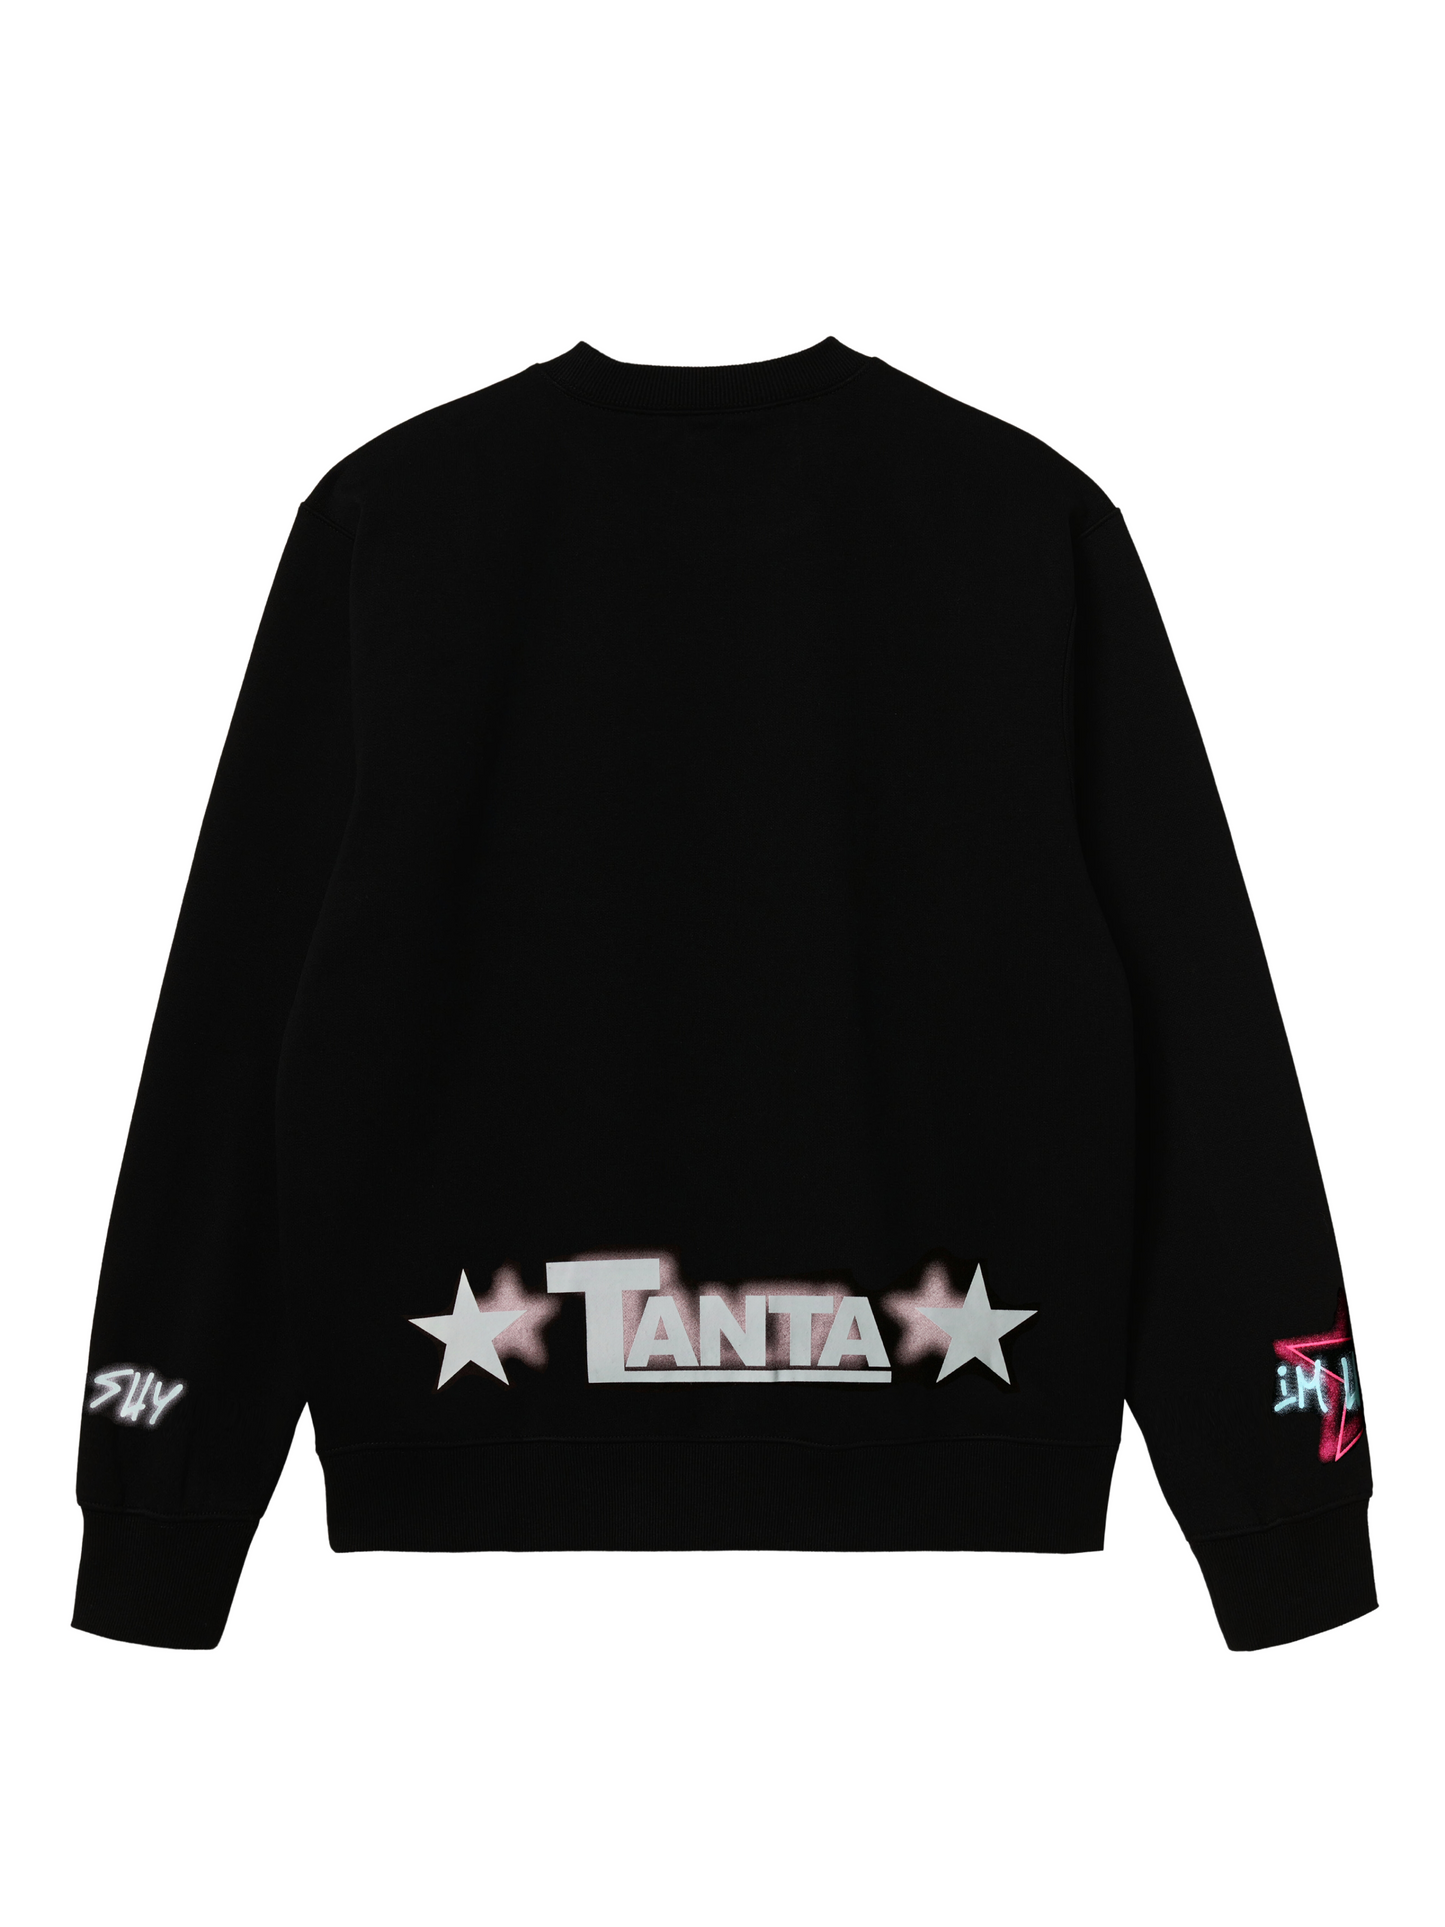 「NEW」Glow-In-The-Dark Diamond Lil Chappy Oversize Sweater - LIMITED EDITION